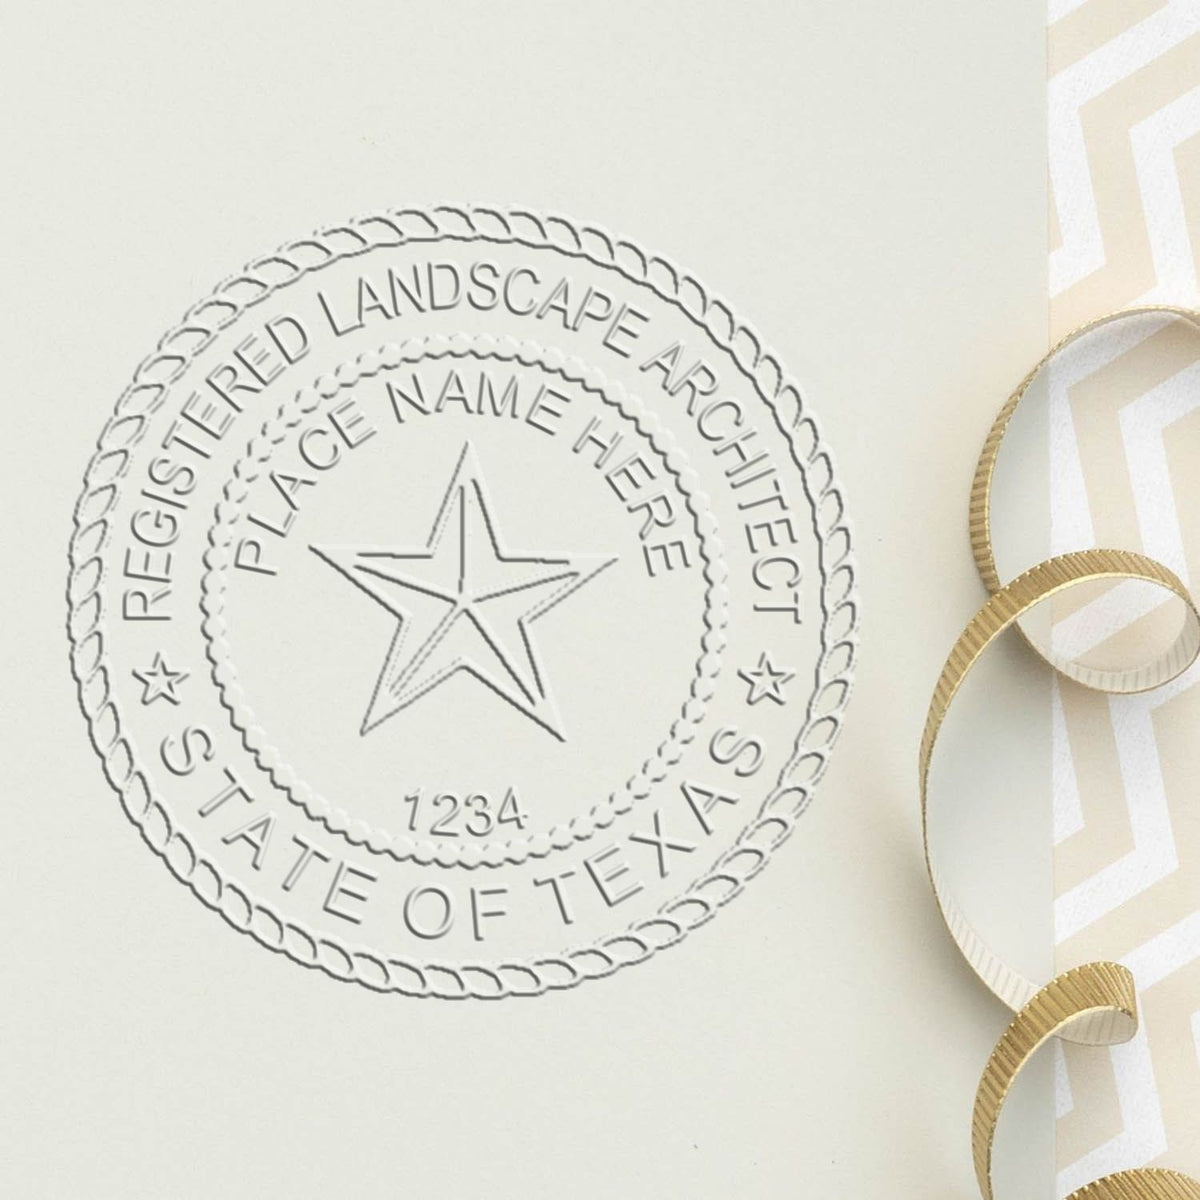 A photograph of the Hybrid Texas Landscape Architect Seal stamp impression reveals a vivid, professional image of the on paper.